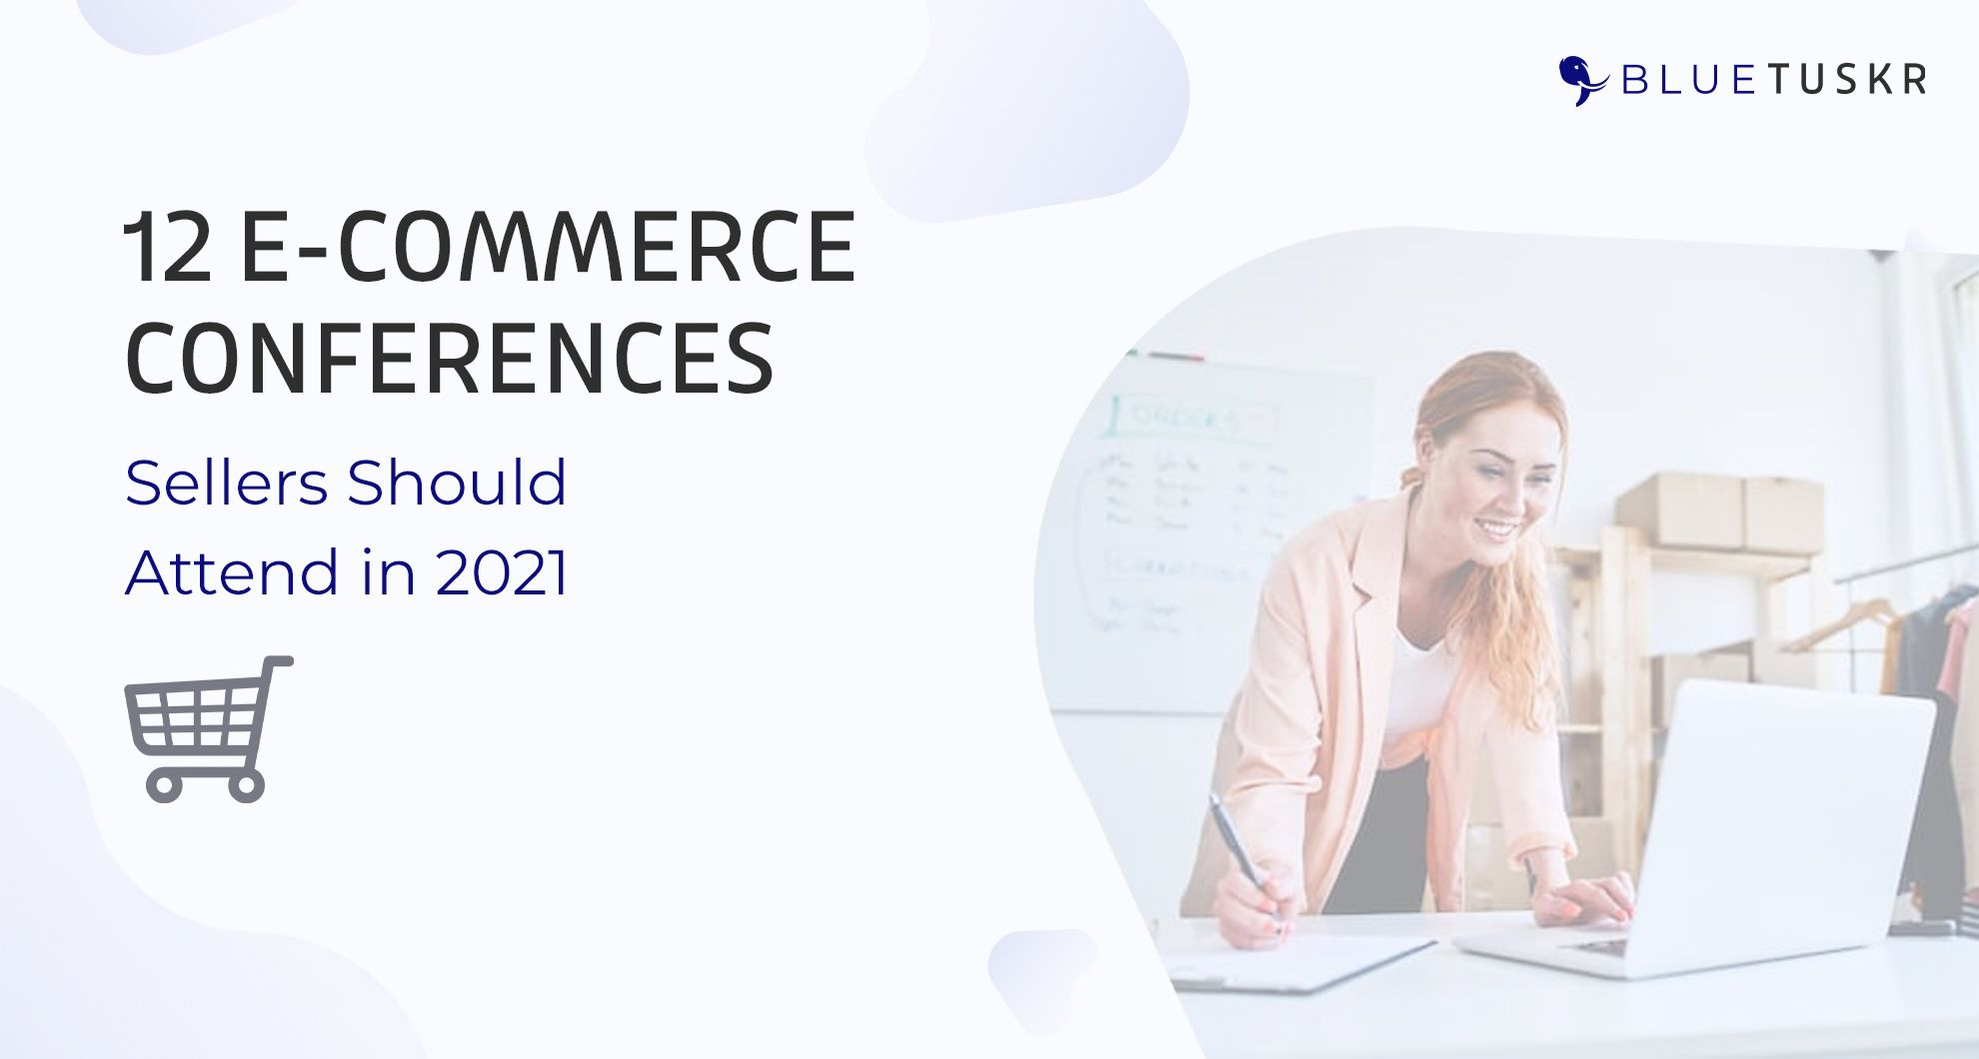 12 E-commerce Conferences Sellers Should Attend in 2021